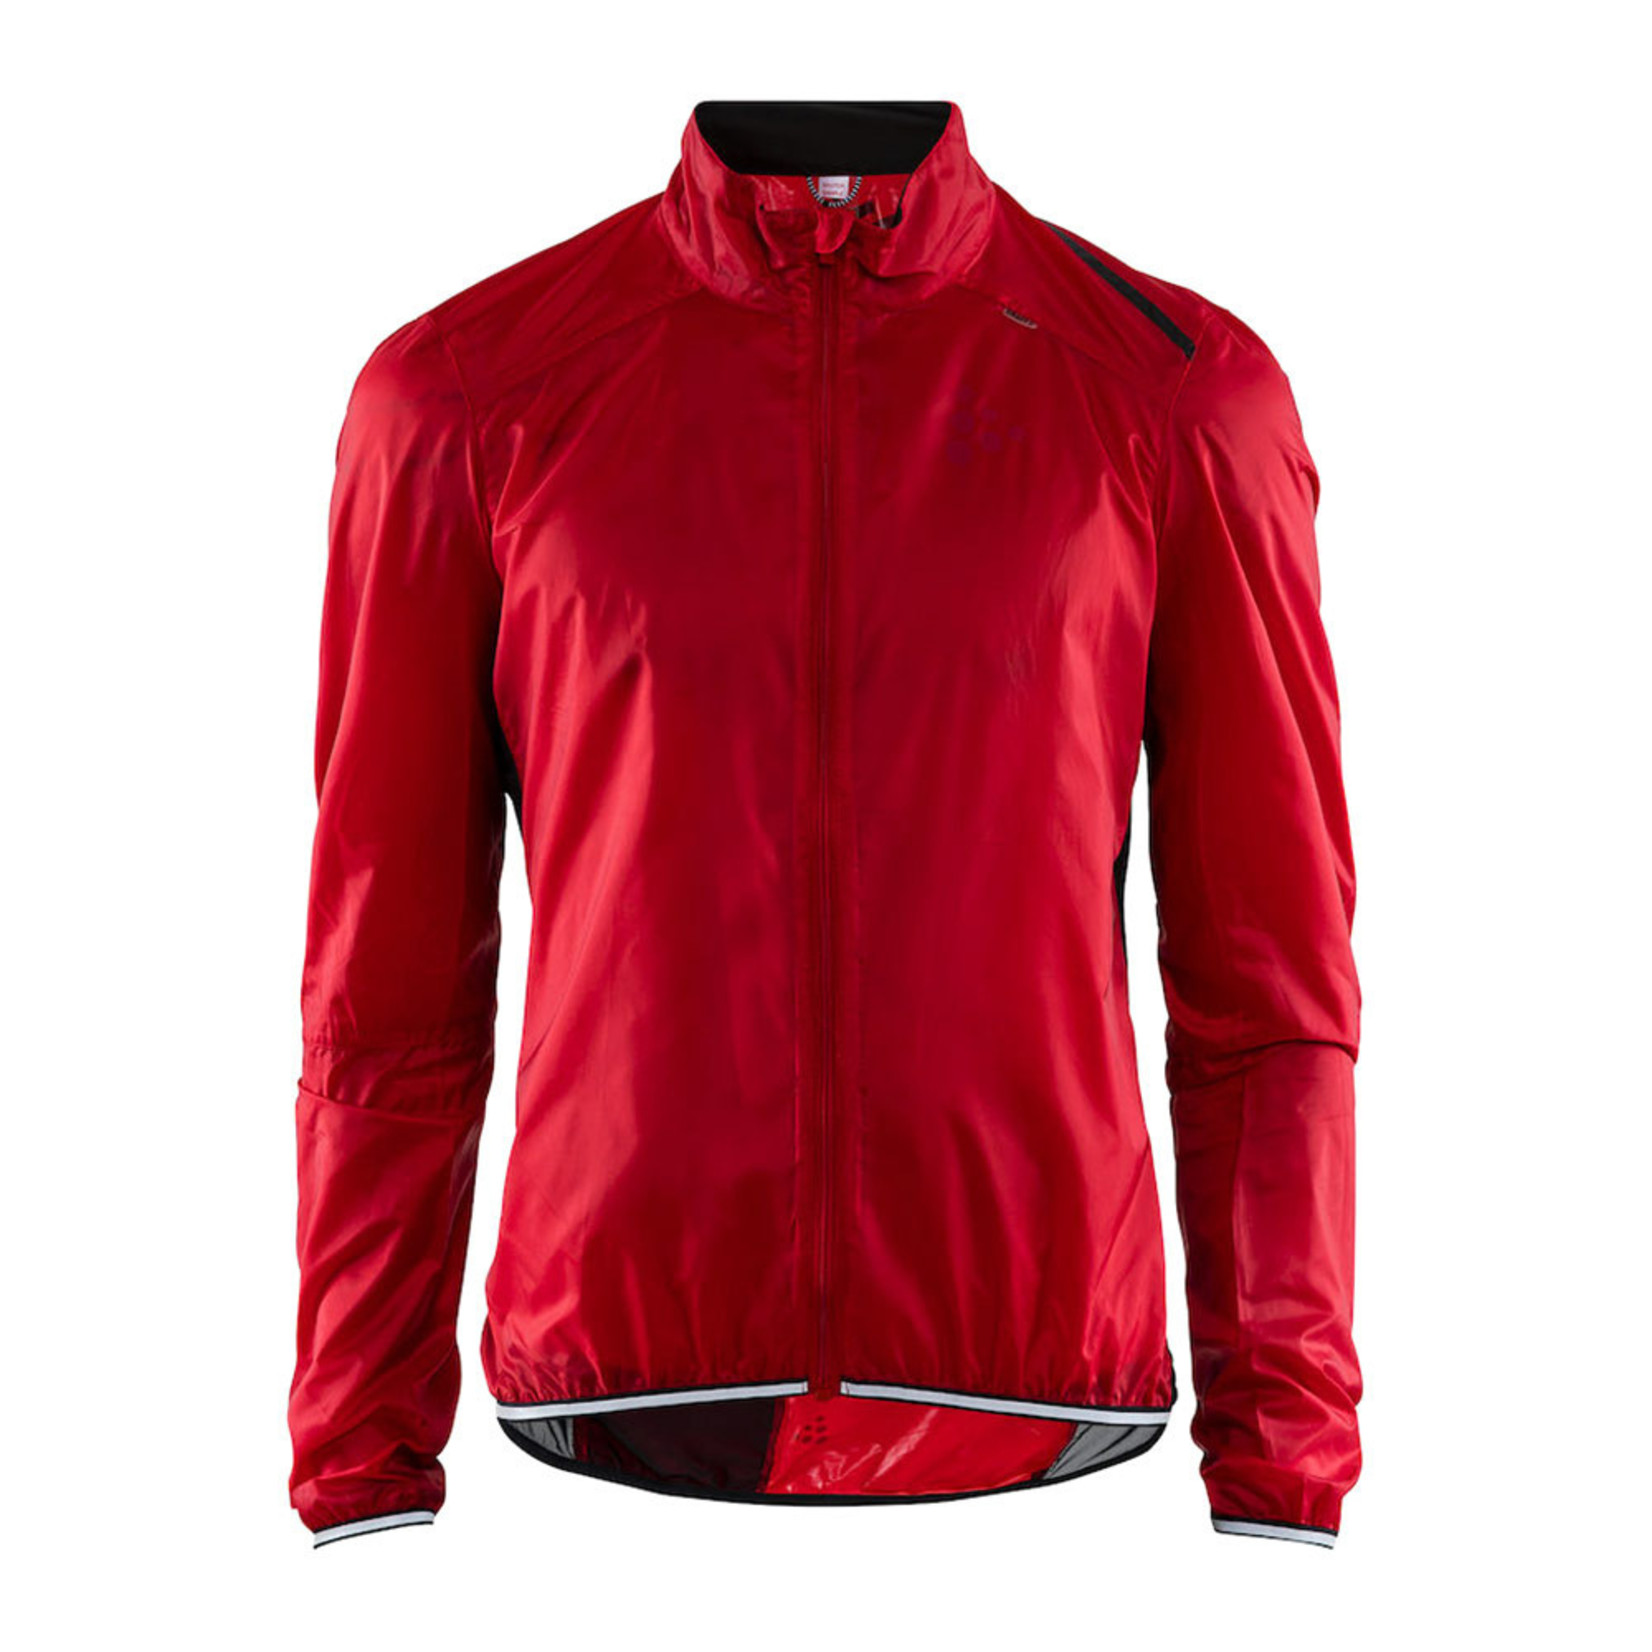 Craft Men's Lithe Cycling Jacket